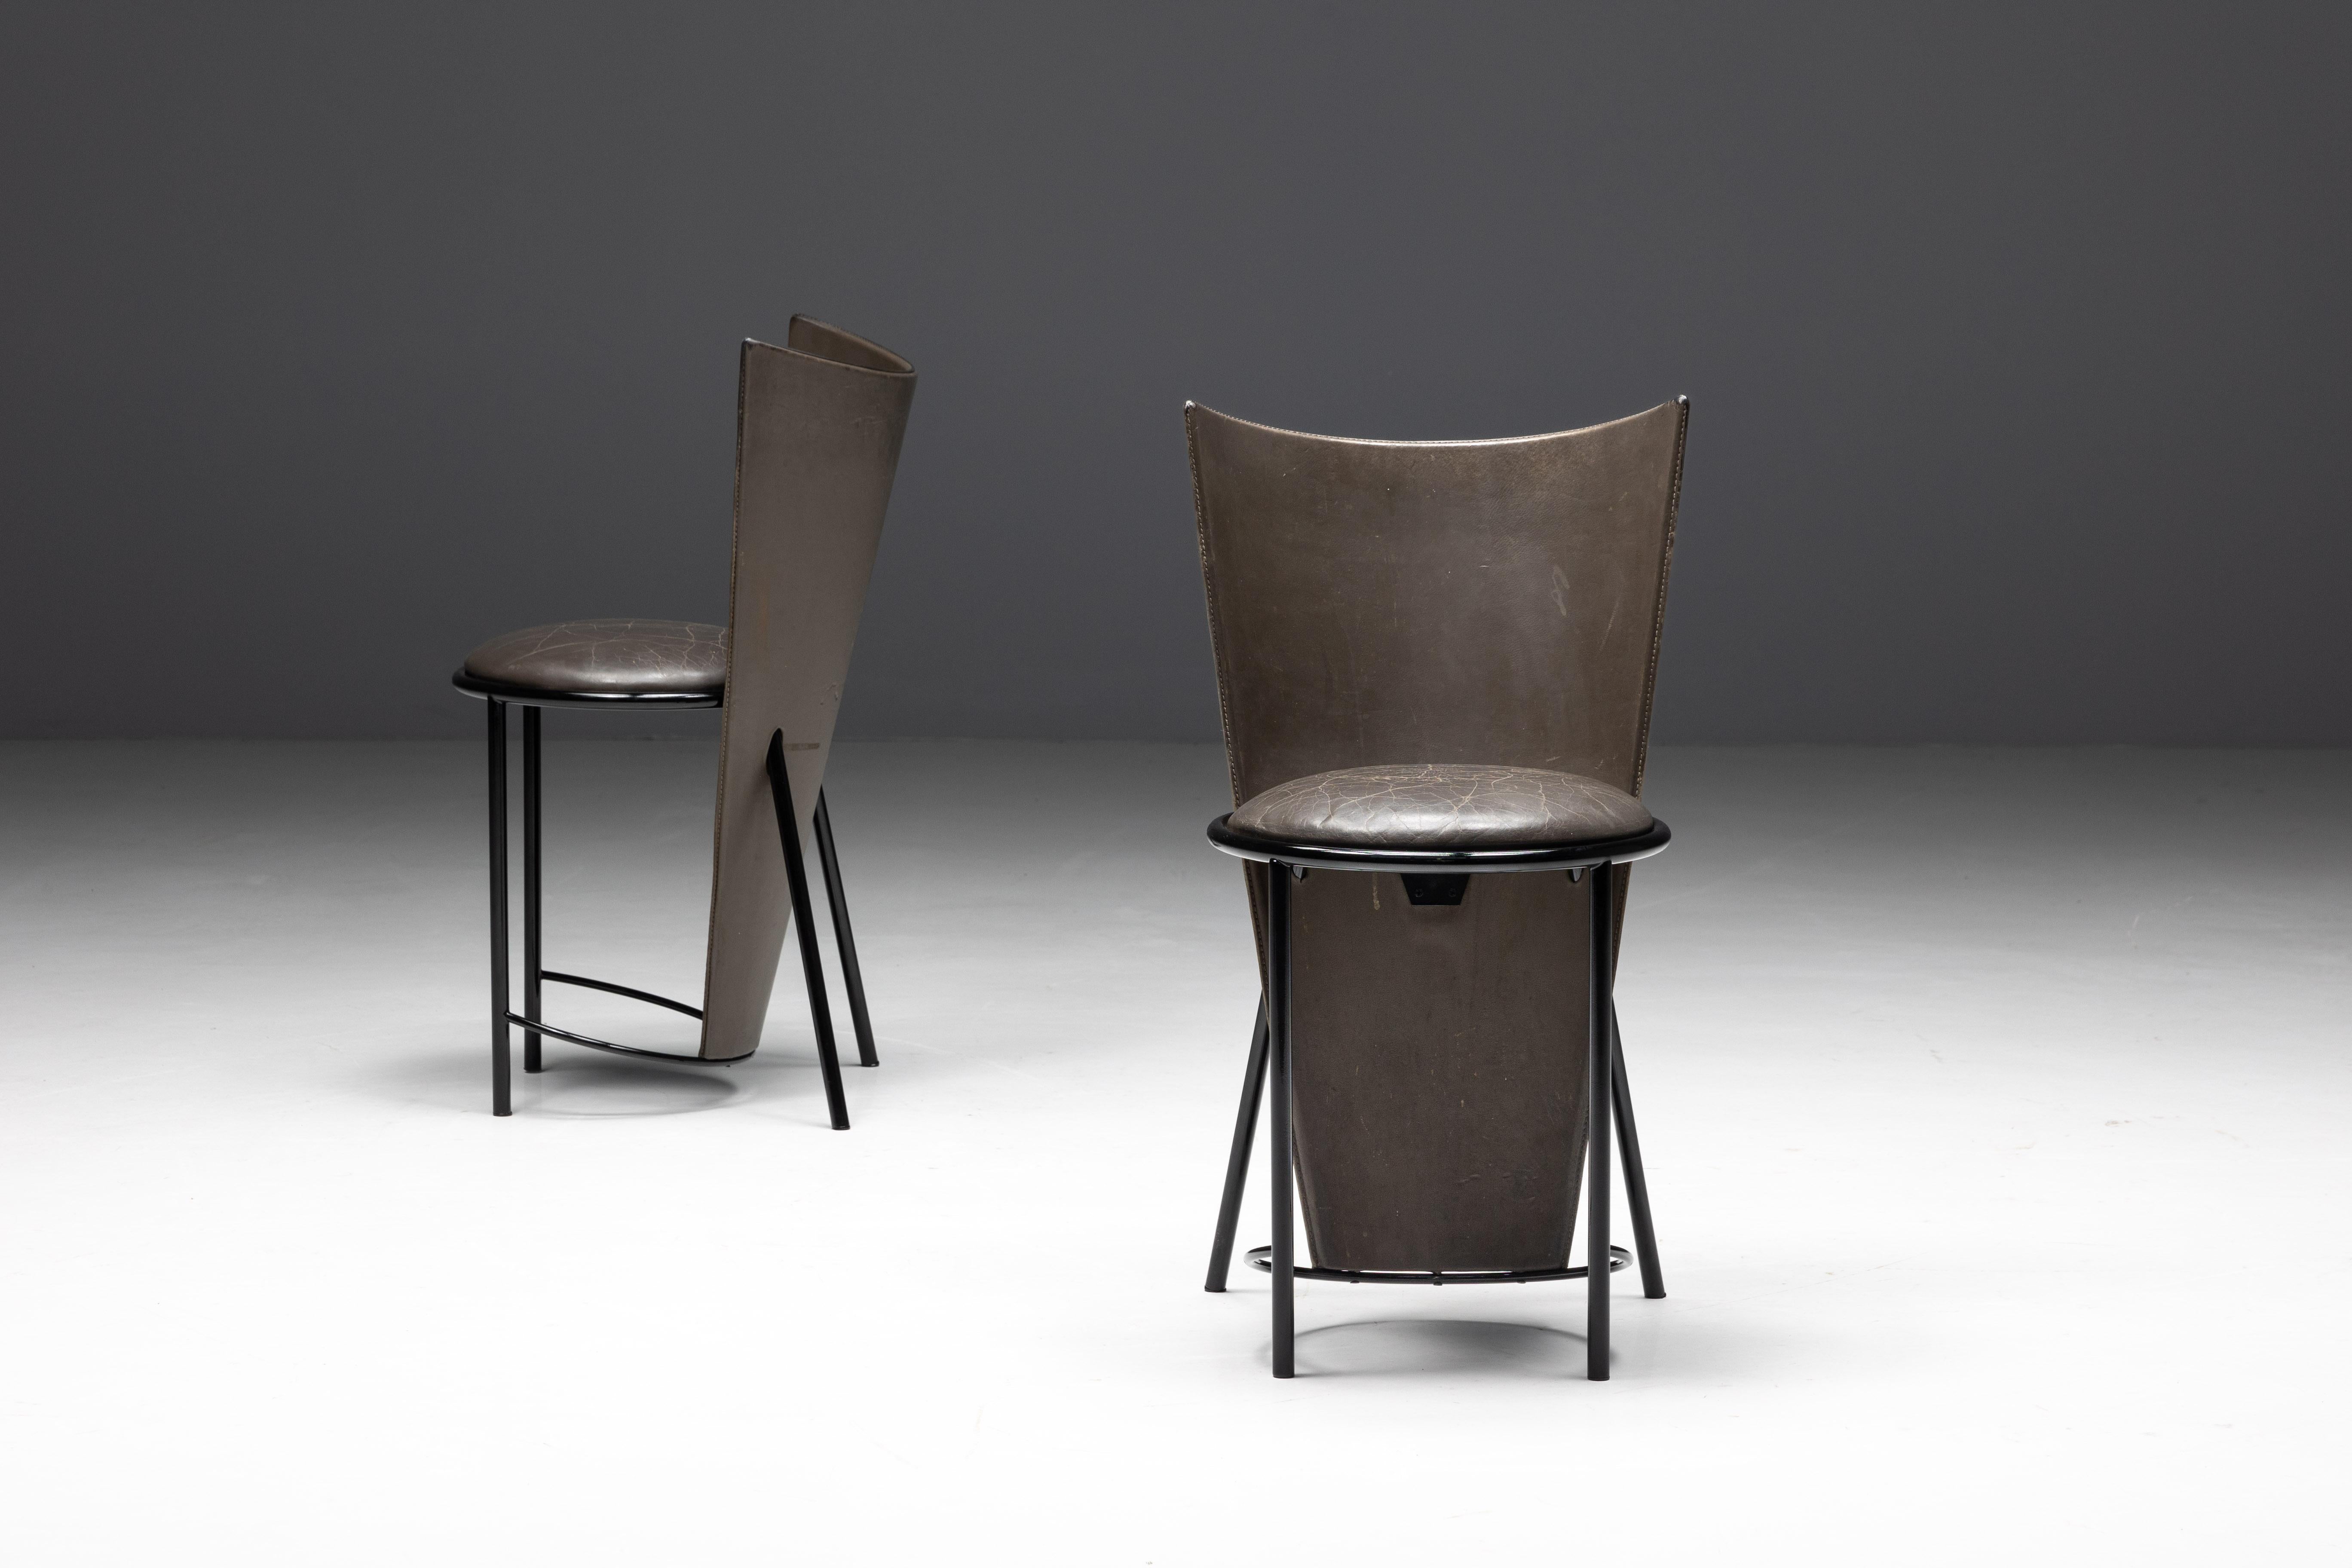 Metal Sevilla Chairs by Frans Van Praet in Grey Leather, Belgium, 1990s For Sale